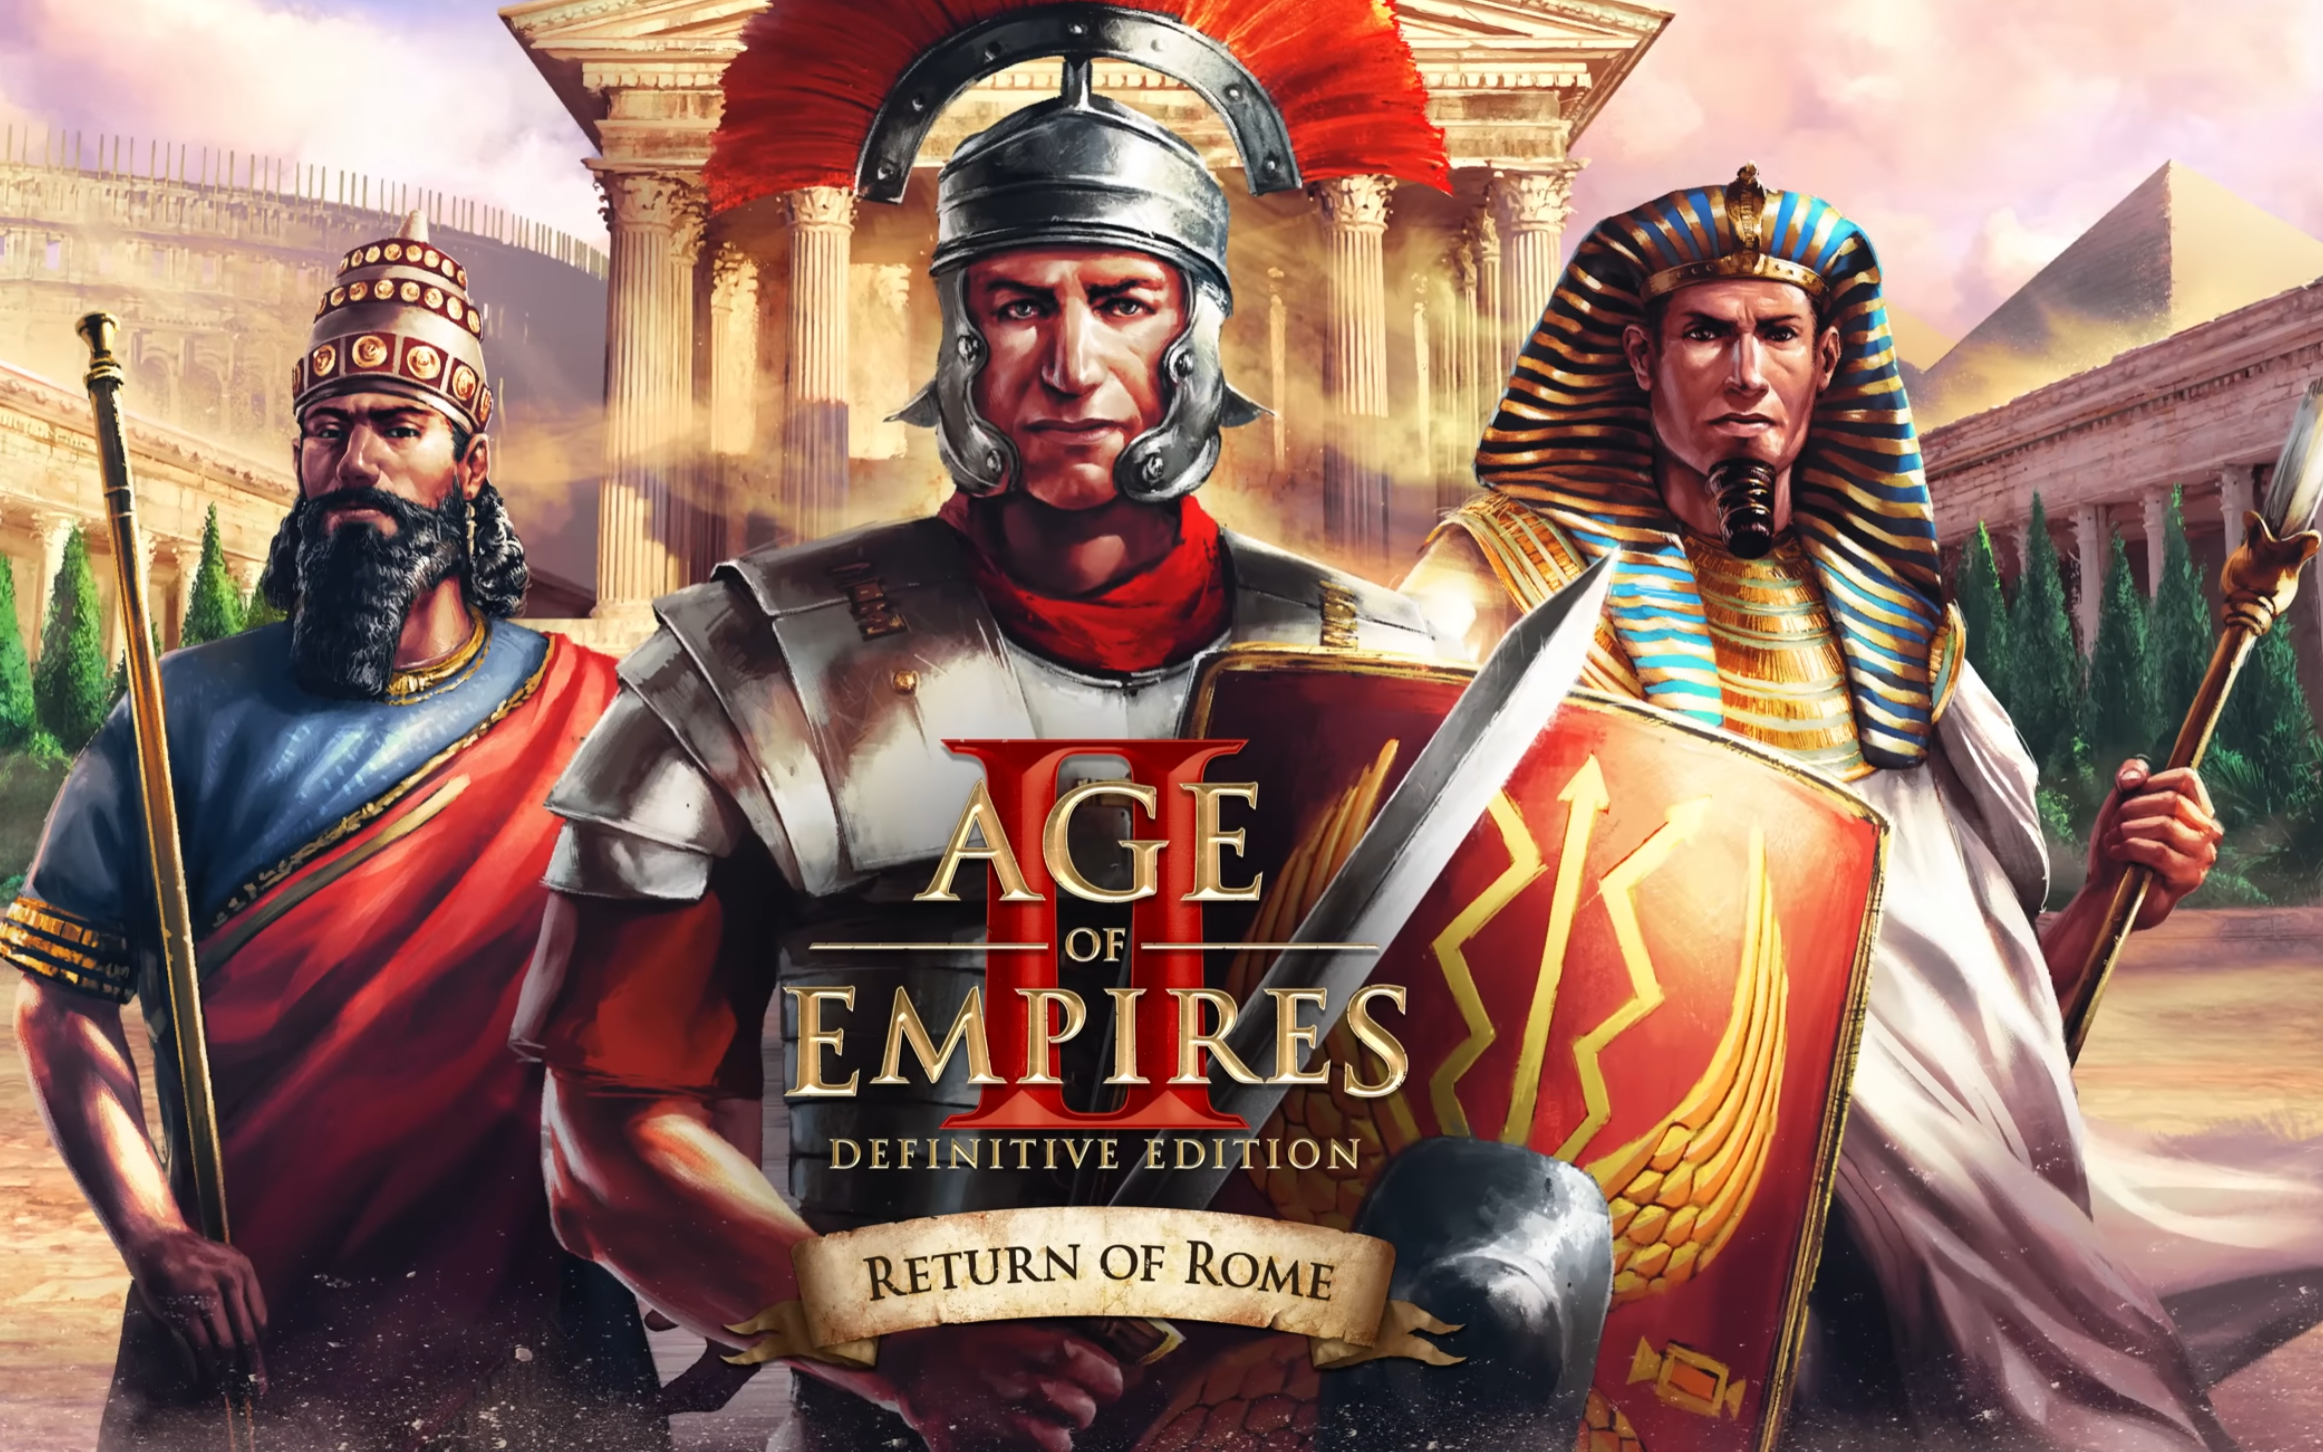 Age of Empires II: Definitive Edition Return of Rome